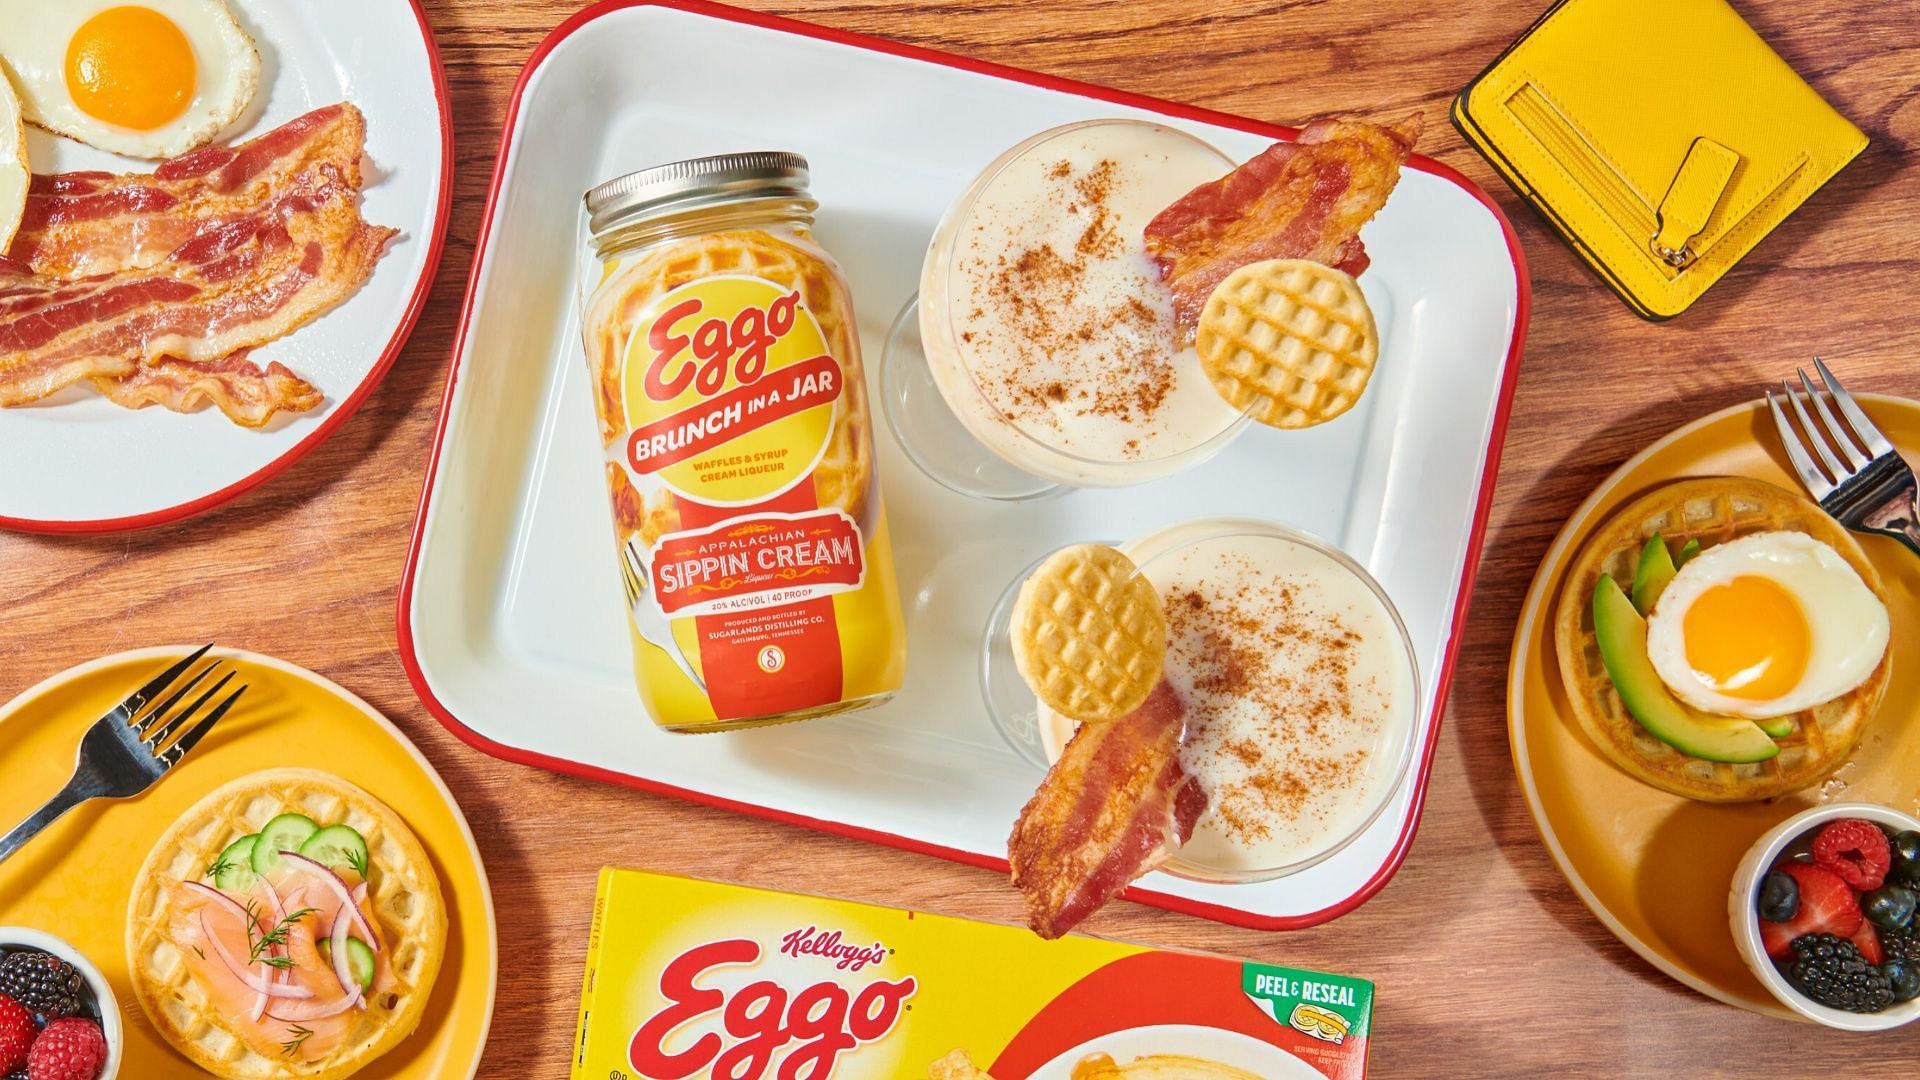 EGGO introduces its new Brunch in a Jar Sippin